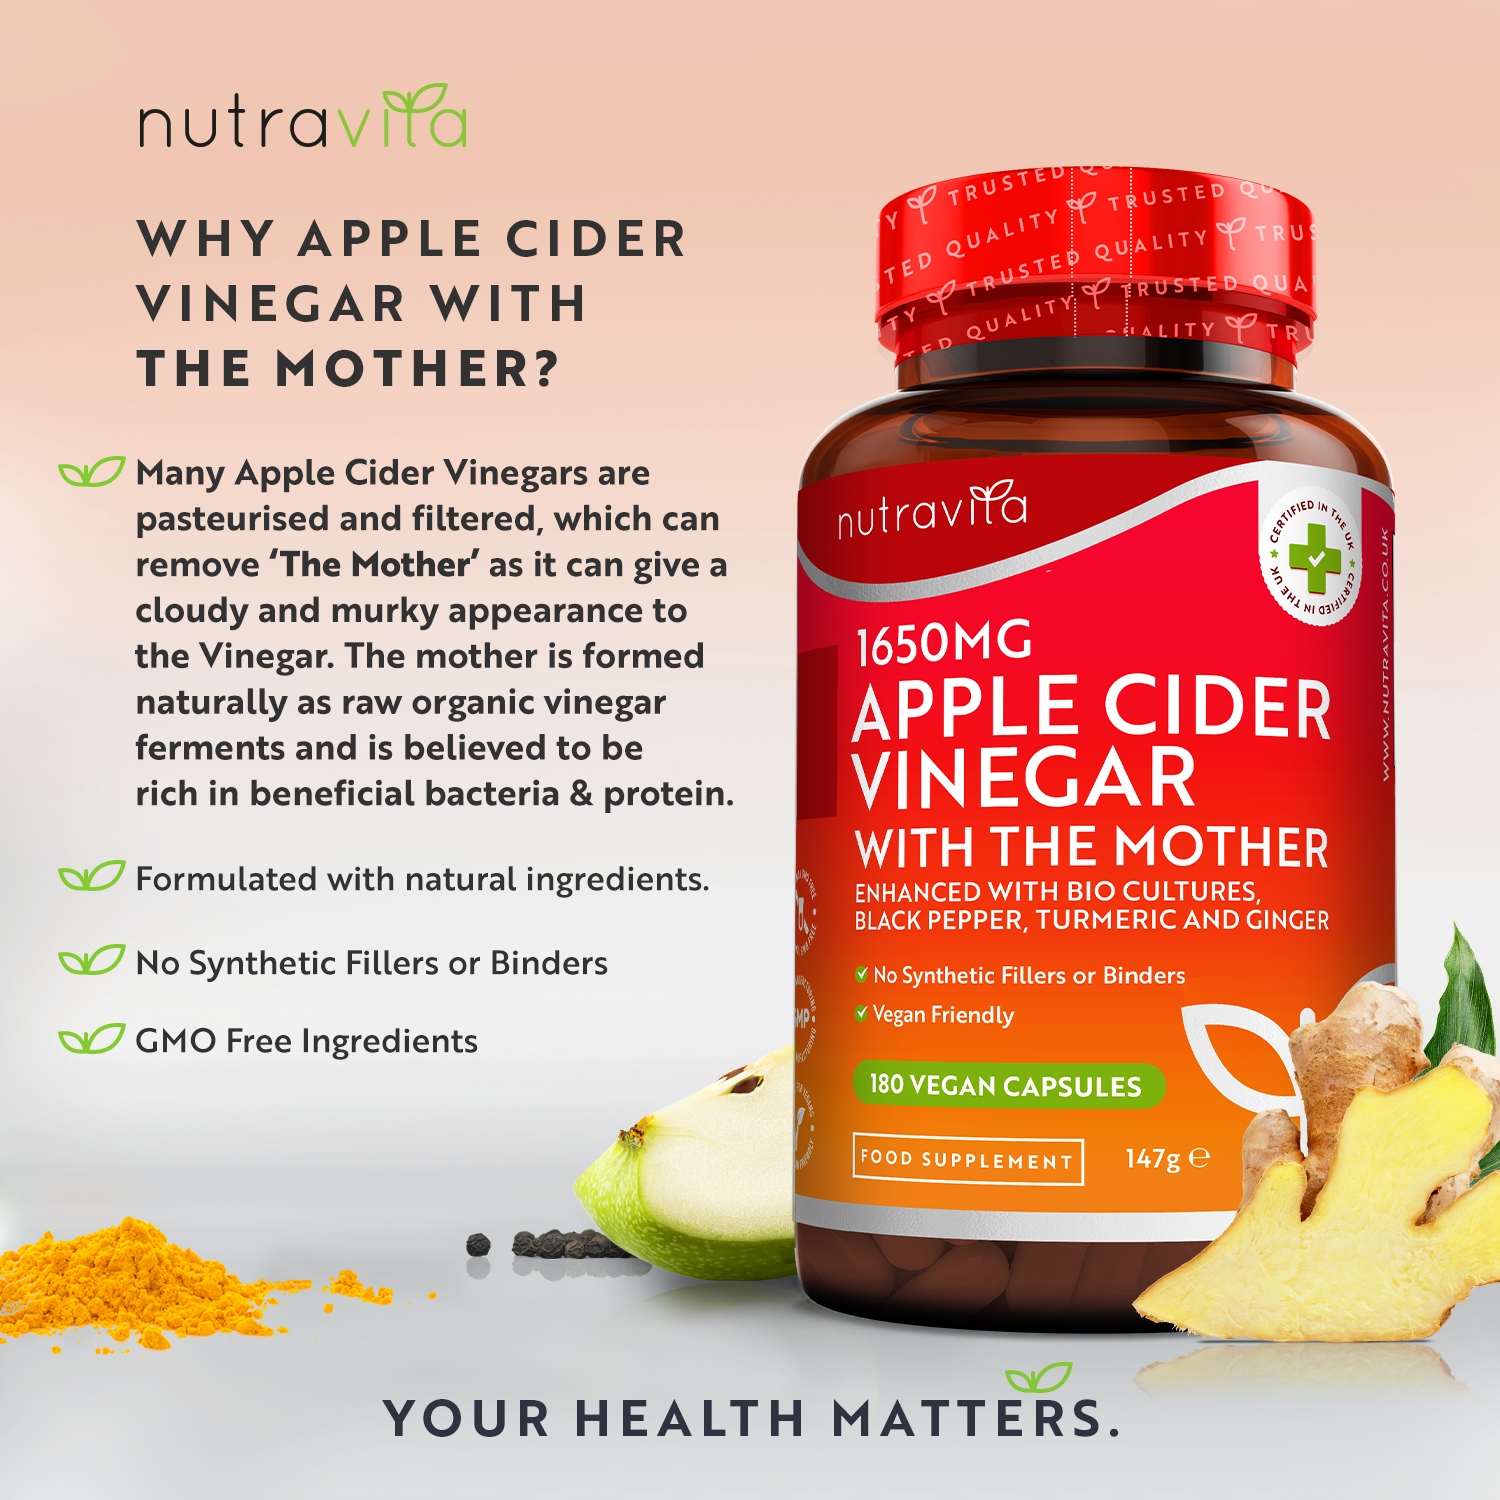 Apple Cider Vinegar 1650MG with The Mother 180 Vegan Capsules